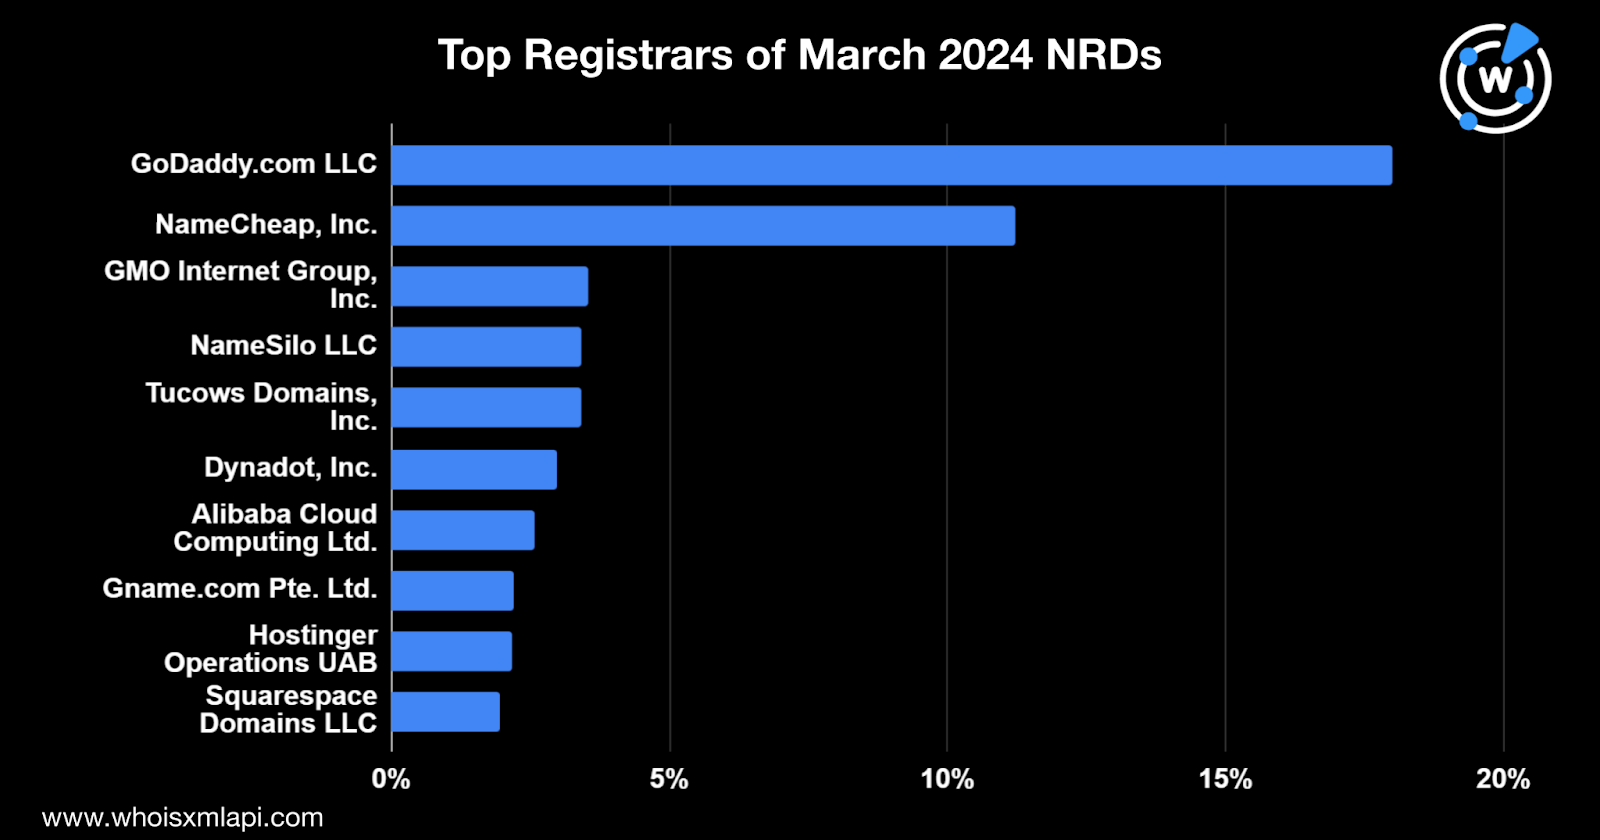 Top registrars of March 2024 NRDs